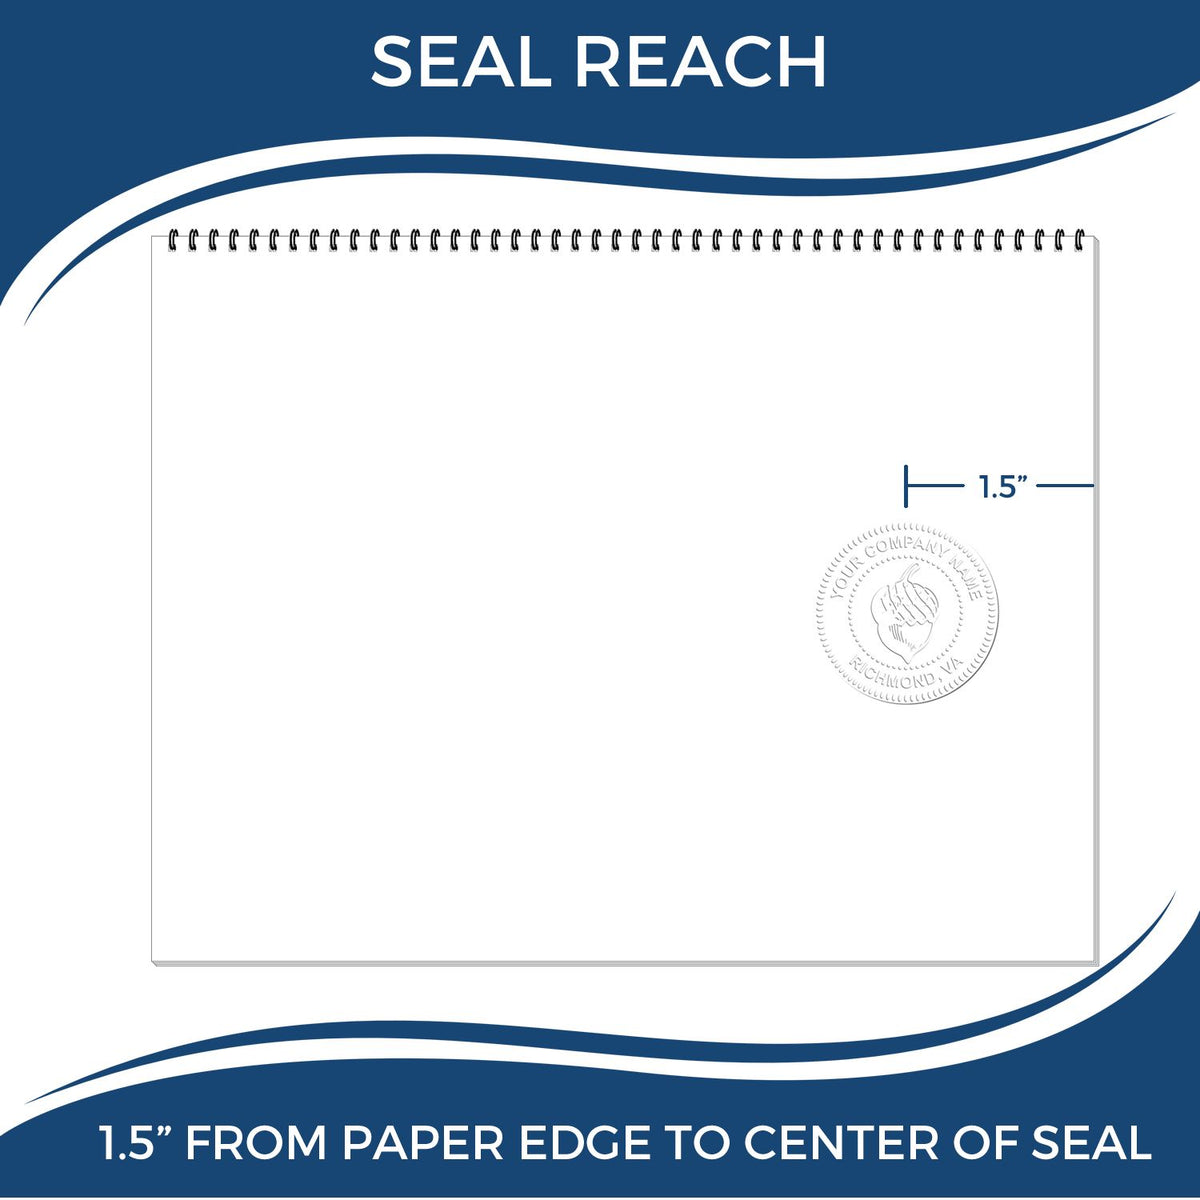 An infographic showing the seal reach which is represented by a ruler and a miniature seal image of the Soft Pocket North Carolina Landscape Architect Embosser